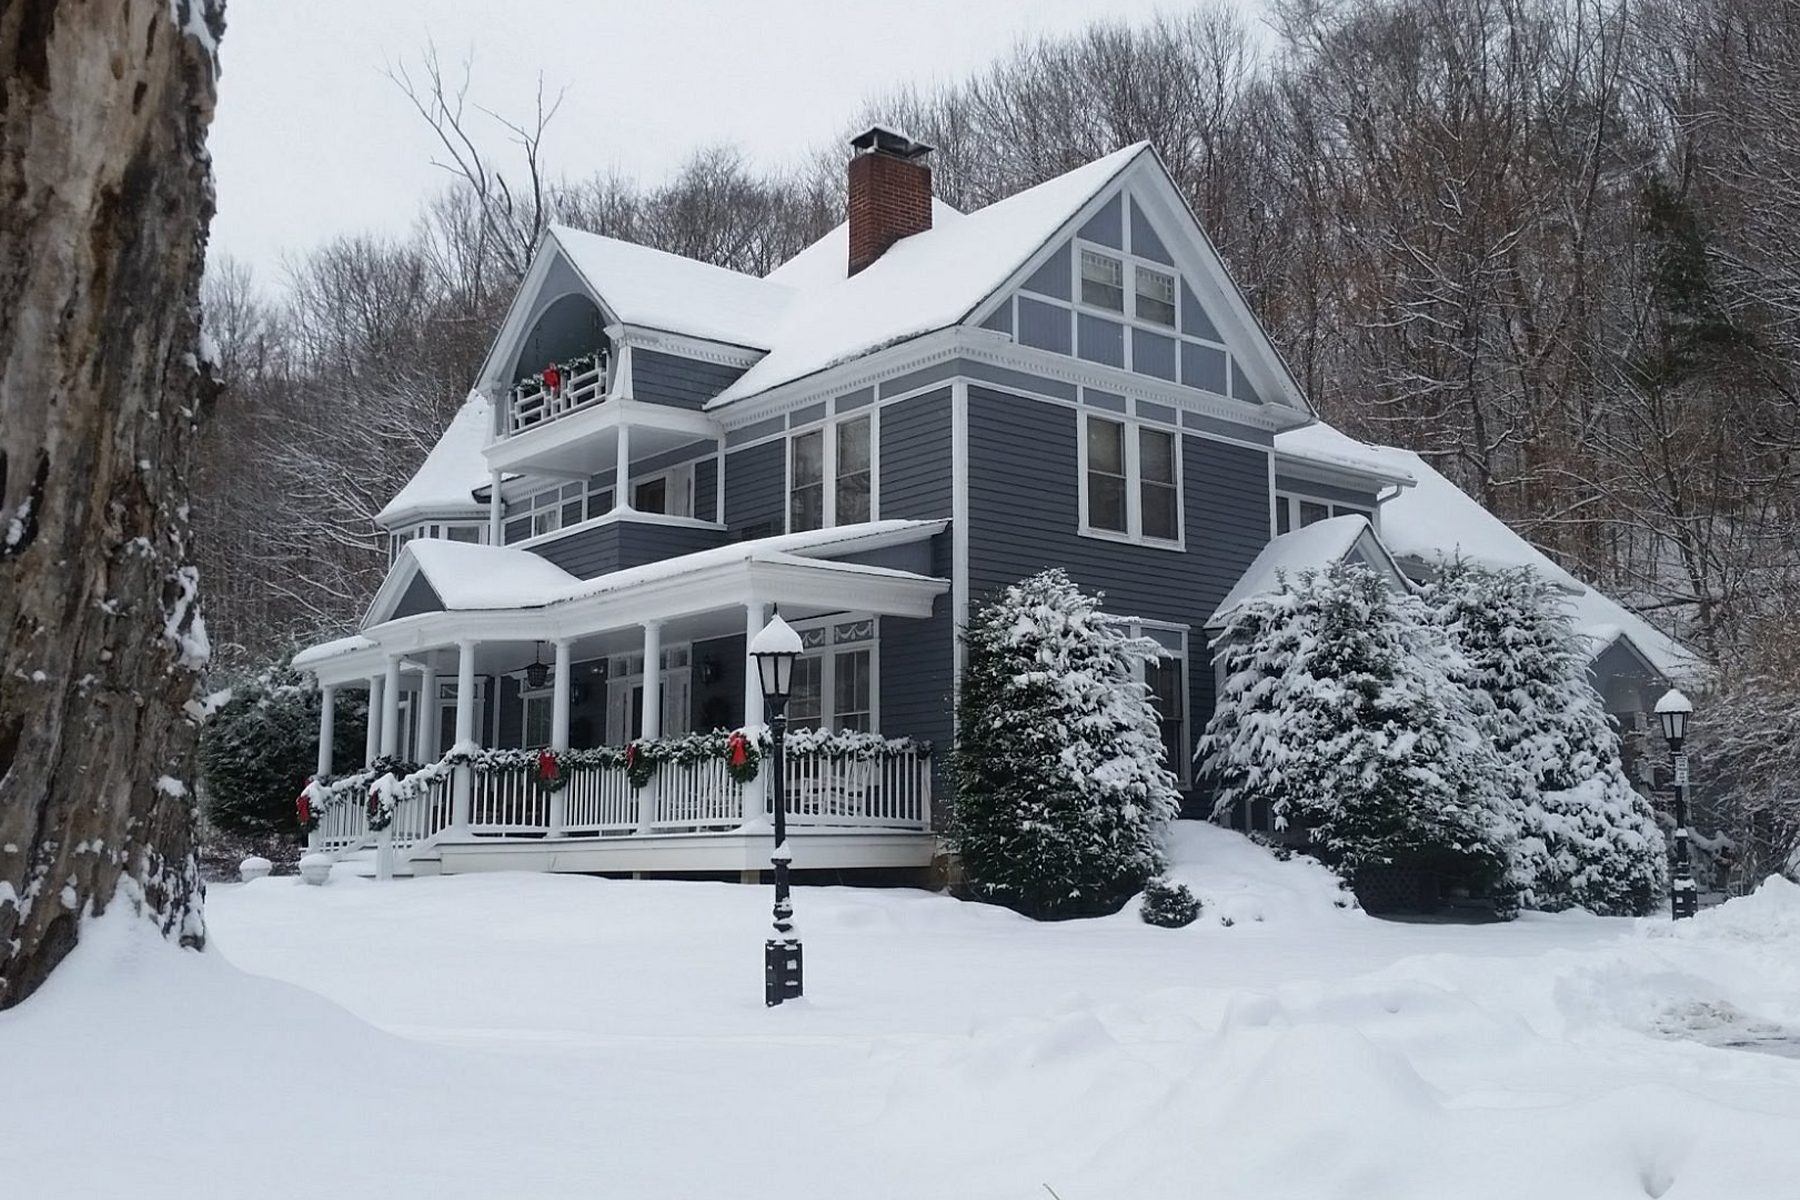 <h3 class="">Lenox, Massachusetts</h3> <p class=""><strong>Best for: </strong>A romantic weekend filled with food and wine in the heart of the Berkshires</p> <p>Guests of the <a href="https://www.tripadvisor.com/Hotel_Review-g41639-d77770-Reviews-Cornell_Inn_Lenox-Lenox_Massachusetts.html" rel="noopener">Cornell Inn</a> love the extra touches at this beautiful boutique property, mentioning the stylish decor, outdoor spaces and complimentary goodies and beverages, including the warm cider and bottle of wine waiting in rooms upon arrival. The freshly reimagined bed-and-breakfast, set in a 150-year-old carriage property in the Berkshires, features 28 individual modern rooms and suites designed by 23 different interior designers. Guests can choose from basic queen accommodations to grand suites with a fireplace, a private balcony and several seating areas.</p> <p>The made-to-order breakfast menu changes daily, with healthy options like Greek yogurt and fresh fruit or heartier selections such as "Mom's Special," which might be something as decadent as a stack of buttermilk pancakes with thick, country-style bacon. And guests say the food is outstanding.</p> <p>The Tavern, a hot-pink micro lounge, serves complimentary beverages from morning until 8 or 10 p.m. (depending on the season). While you're there, sample the property's homemade brownies and signature peach sangria, and inquire about neighbors that offer activities like fall apple picking and hayrides.</p> <p><strong>Pros:</strong></p> <ul> <li class="">Fresh, modern take on classic bed-and-breakfasts</li> <li class="">Two rooms are <a href="https://www.rd.com/list/disabled-travel/">ADA compliant</a> and have accessible showers, and there's an ADA-compliant ramp to the main house</li> <li class="">Two rooms have an extra bed to accommodate children (with an extra charge)</li> </ul> <p><strong>Con:</strong></p> <ul> <li class="">Pets are not permitted</li> </ul> <p class="listicle-page__cta-button-shop"><a class="shop-btn" href="https://www.tripadvisor.com/Hotel_Review-g41639-d77770-Reviews-Cornell_Inn_Lenox-Lenox_Massachusetts.html">Book Now</a></p>